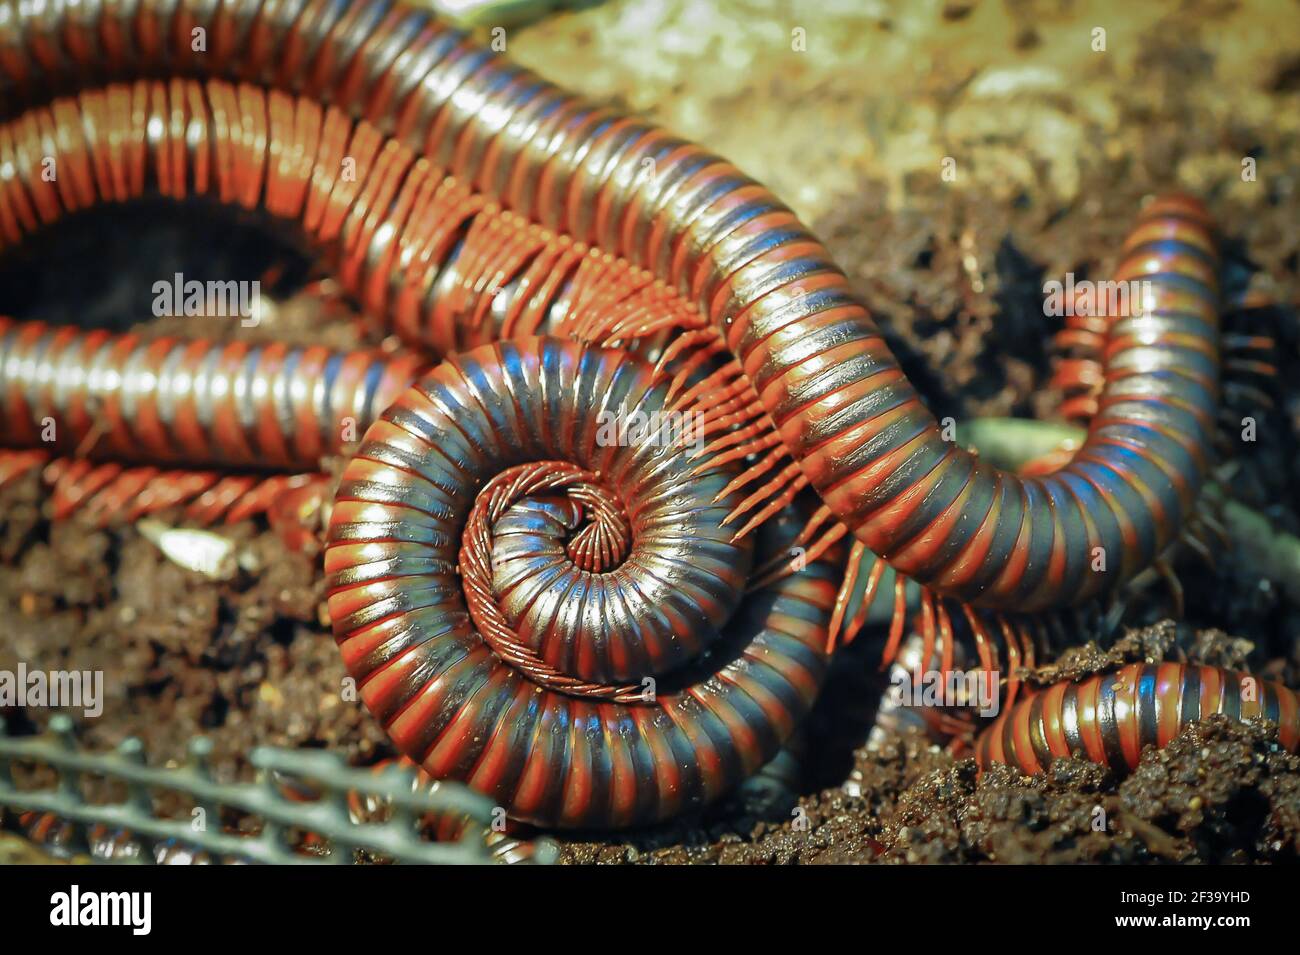 Giant brown millipedes, (Harpagophoridae) Malaysia. Close up detail of several millipedes, coiled, burrowing and crawling on soft ground. Stock Photo